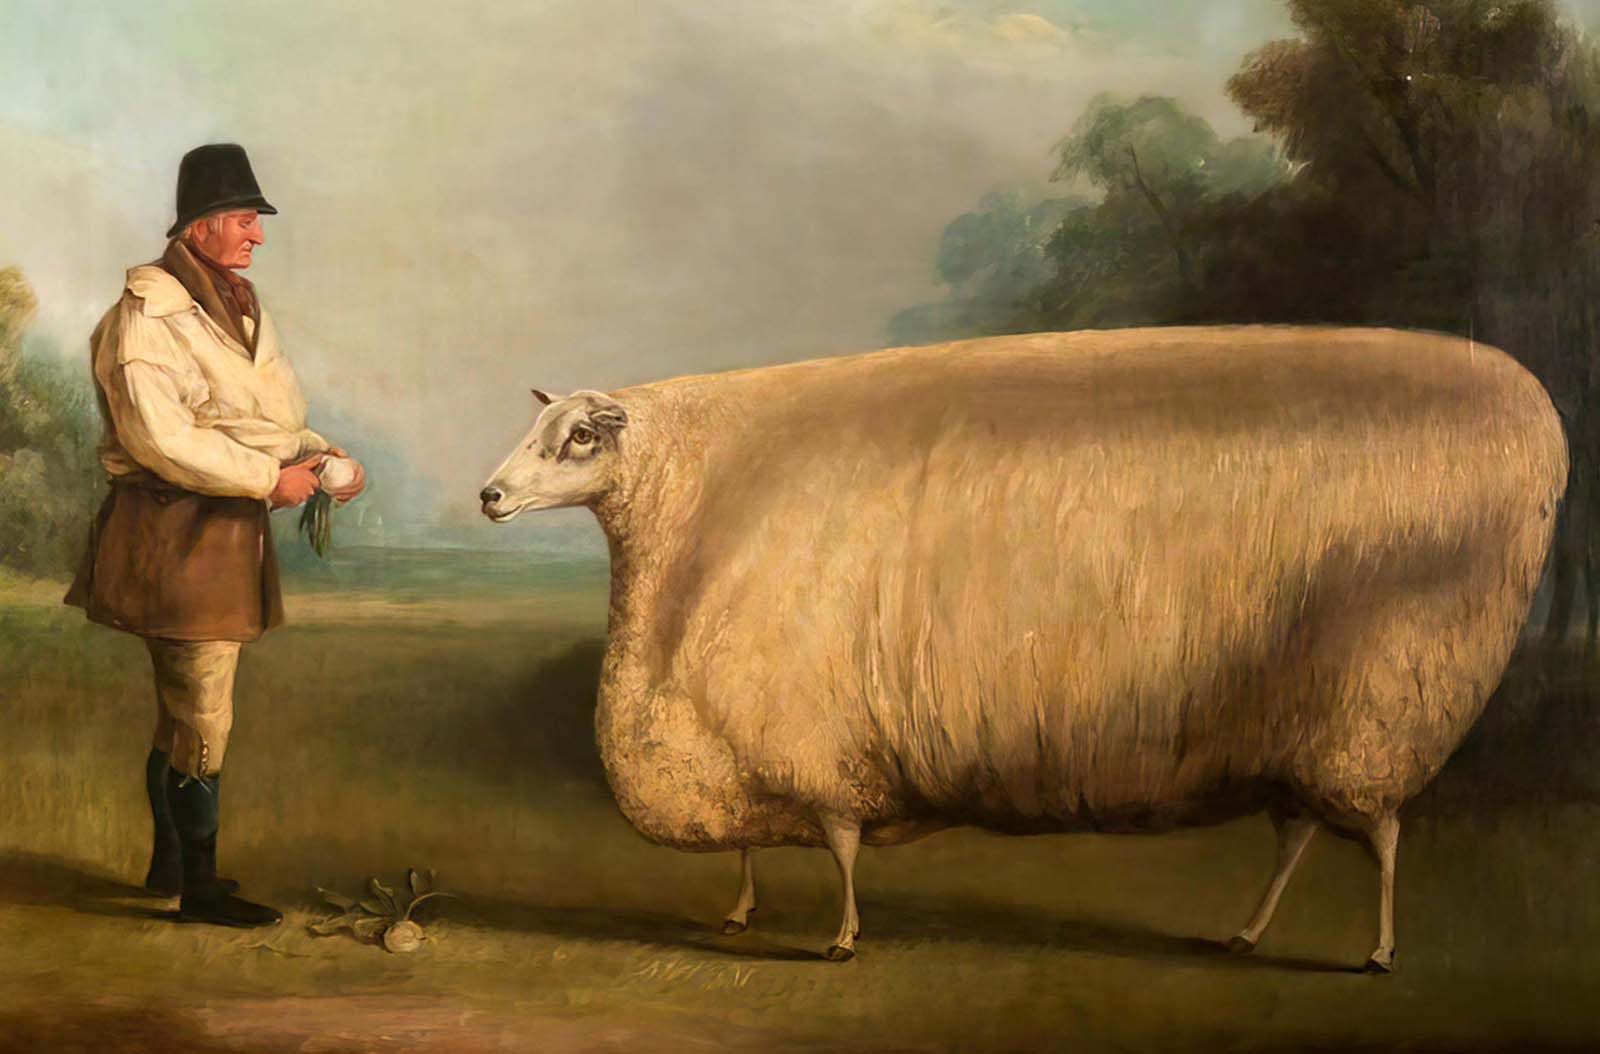 The Rectangular Cows: Geometric Livestock Depicted in 19th-Century British Paintings